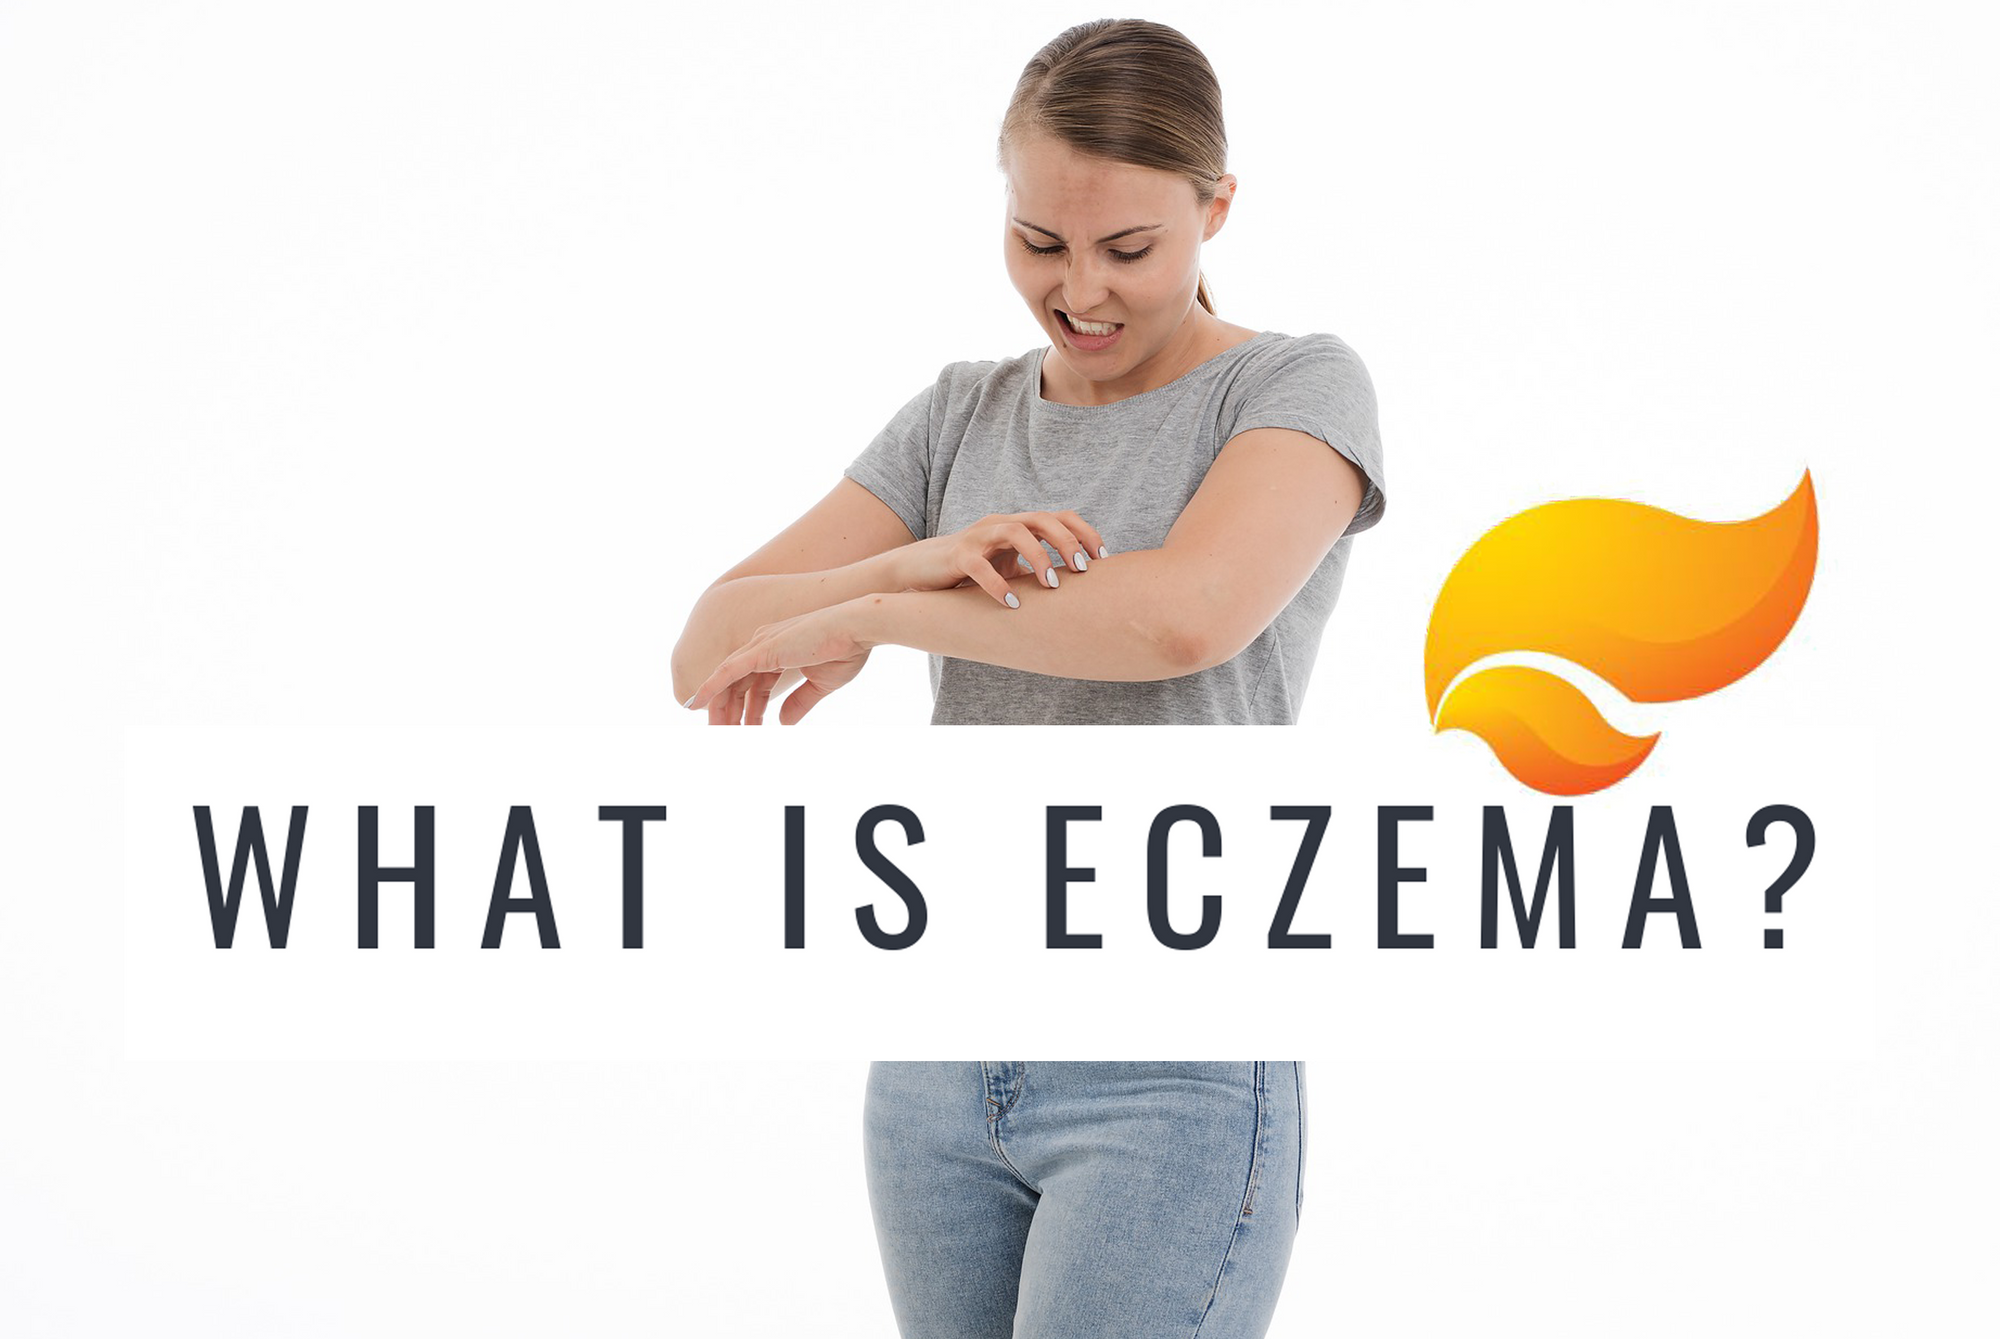 WHAT IS ECZEMA?